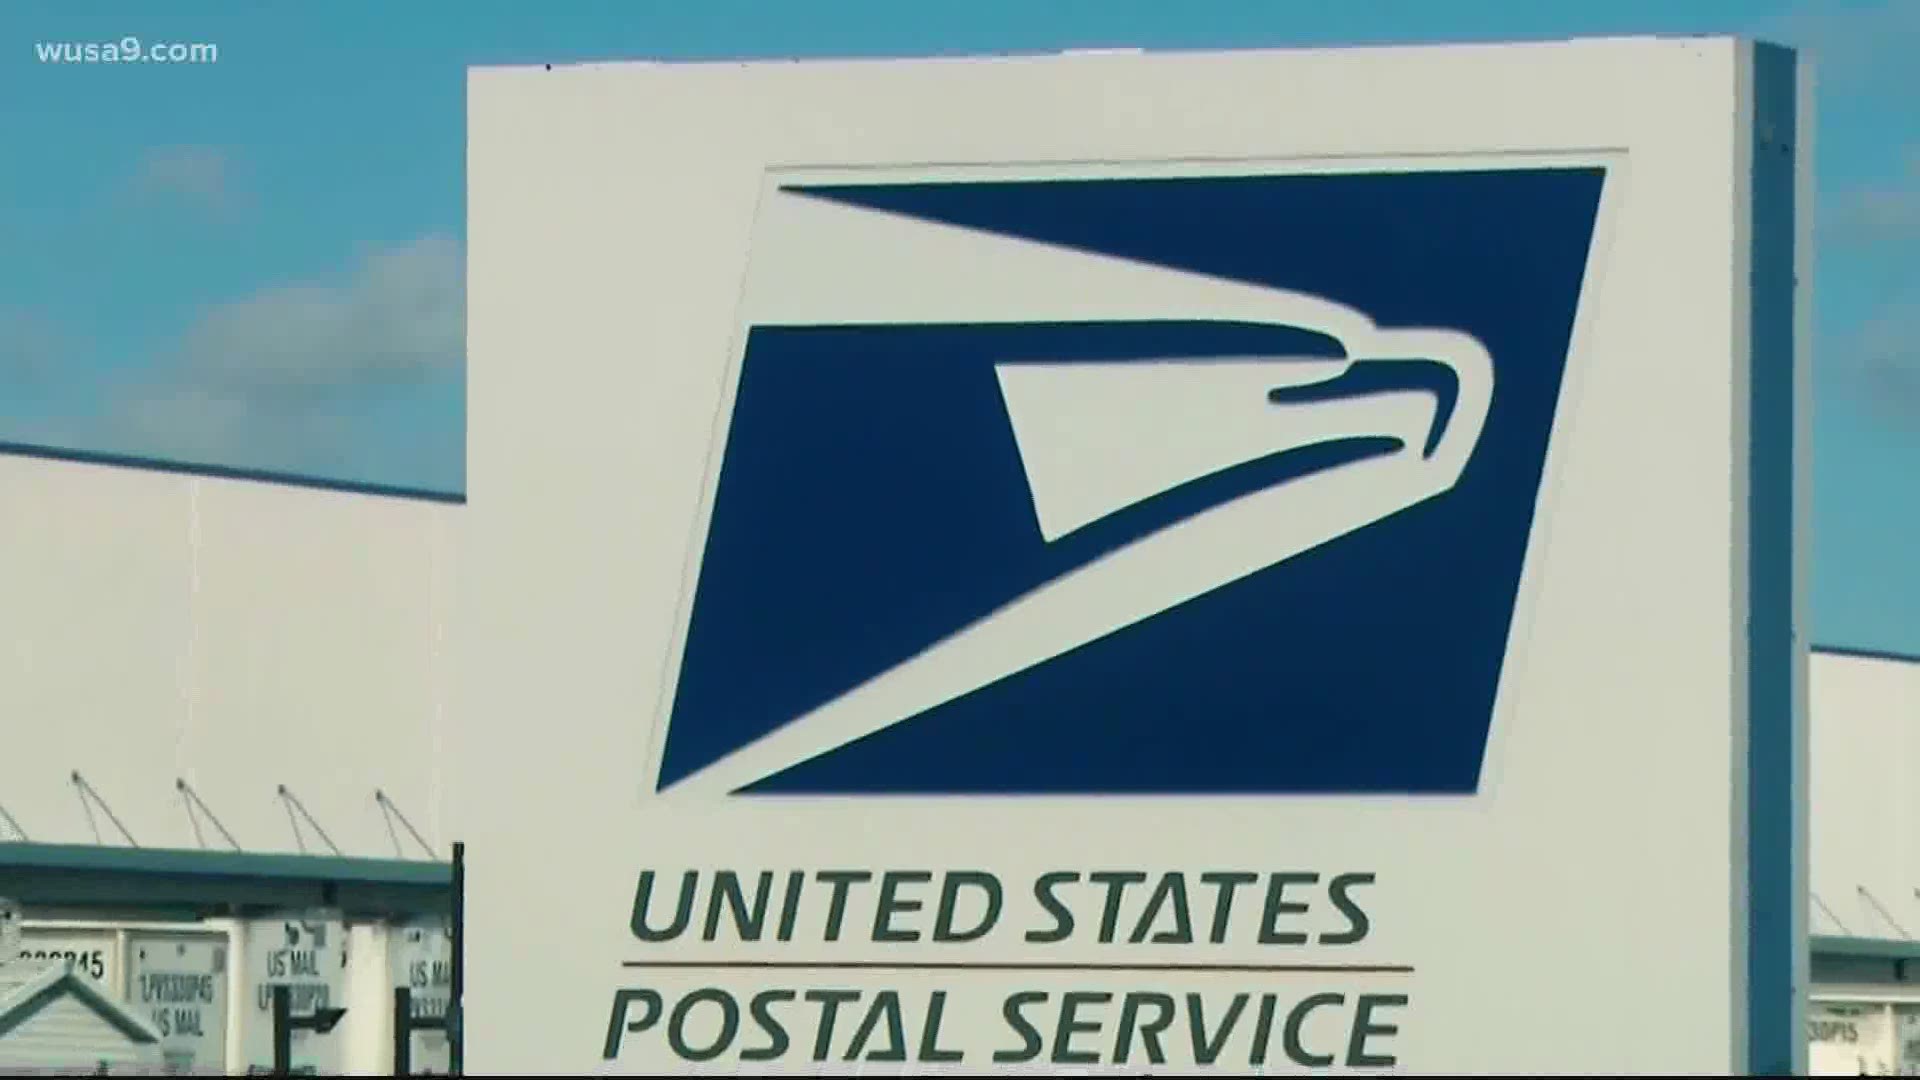 DC, Maryland and Virginia were told that the Postal Service might not be able to meet their state-mandated deadlines for mail-in ballots in the 2020 election.